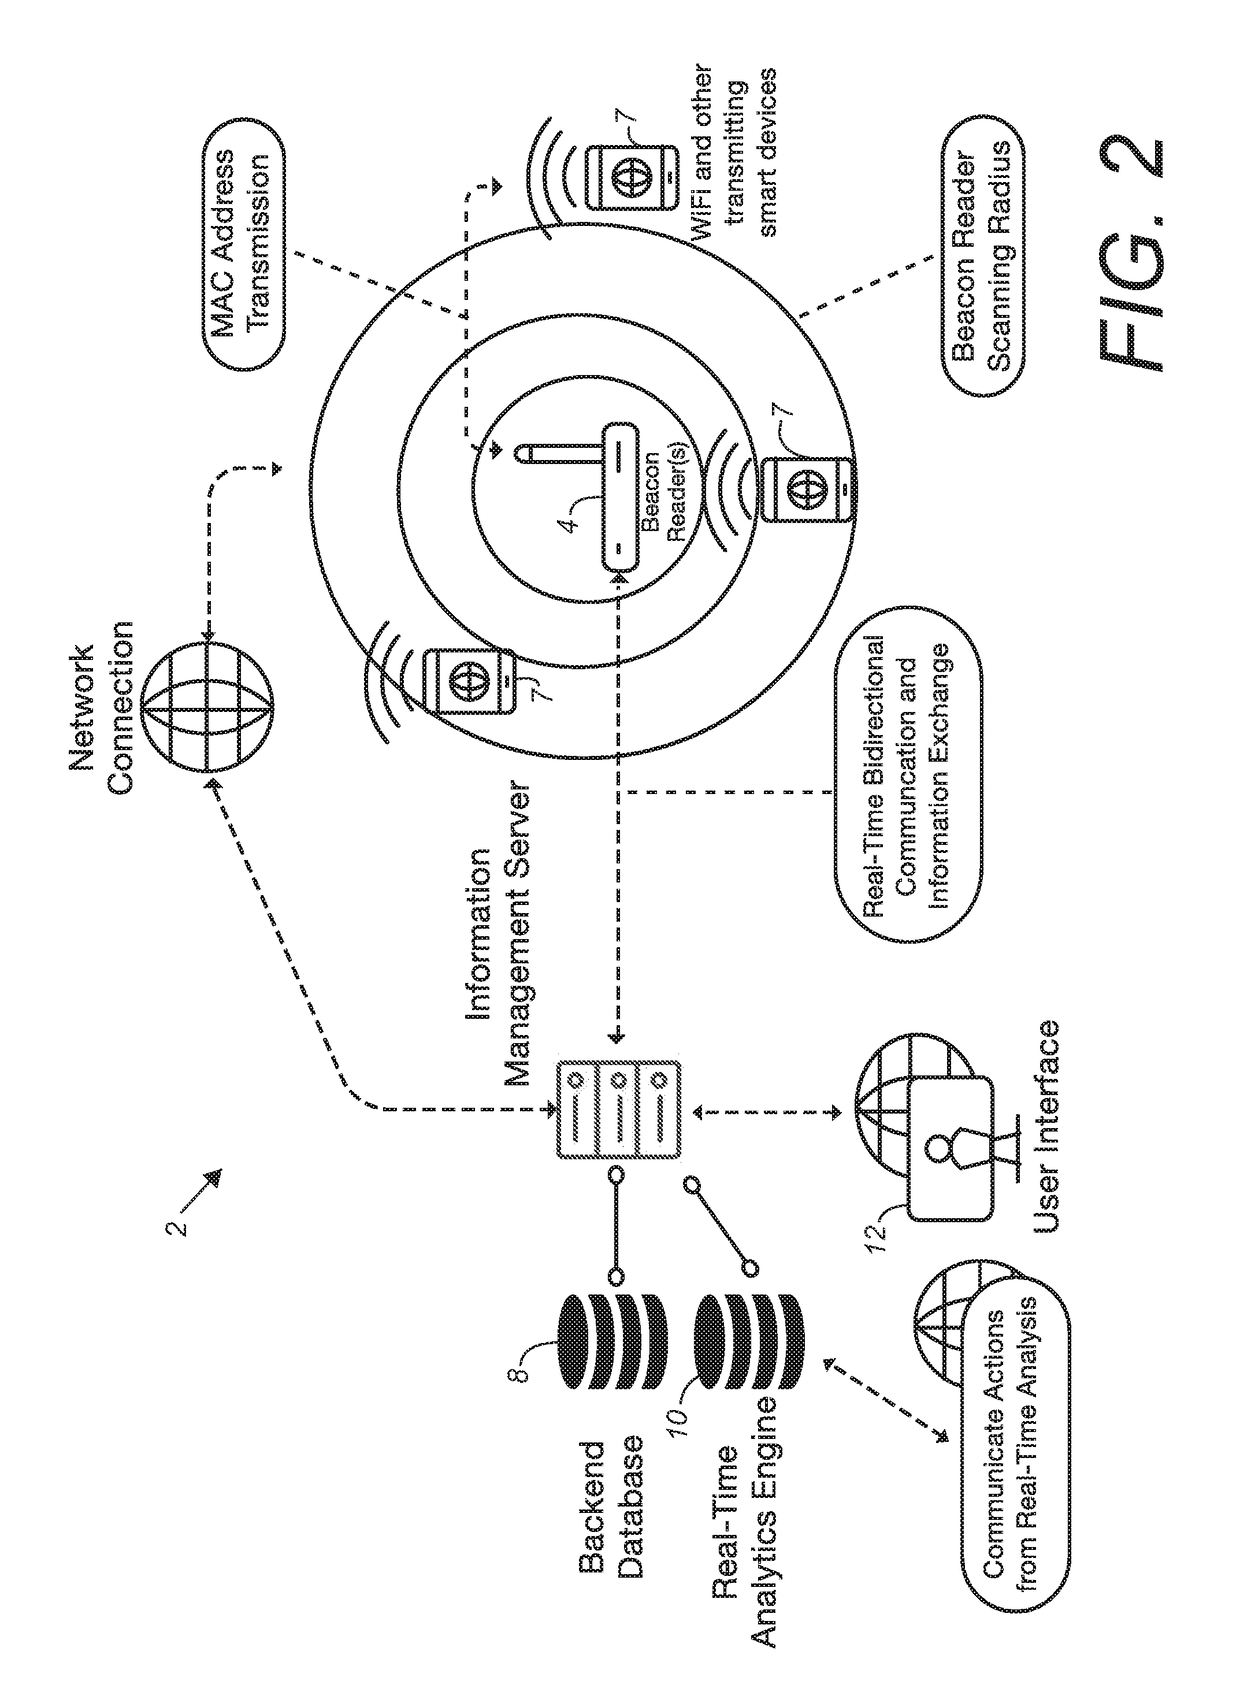 Electronic beacon reader system and method